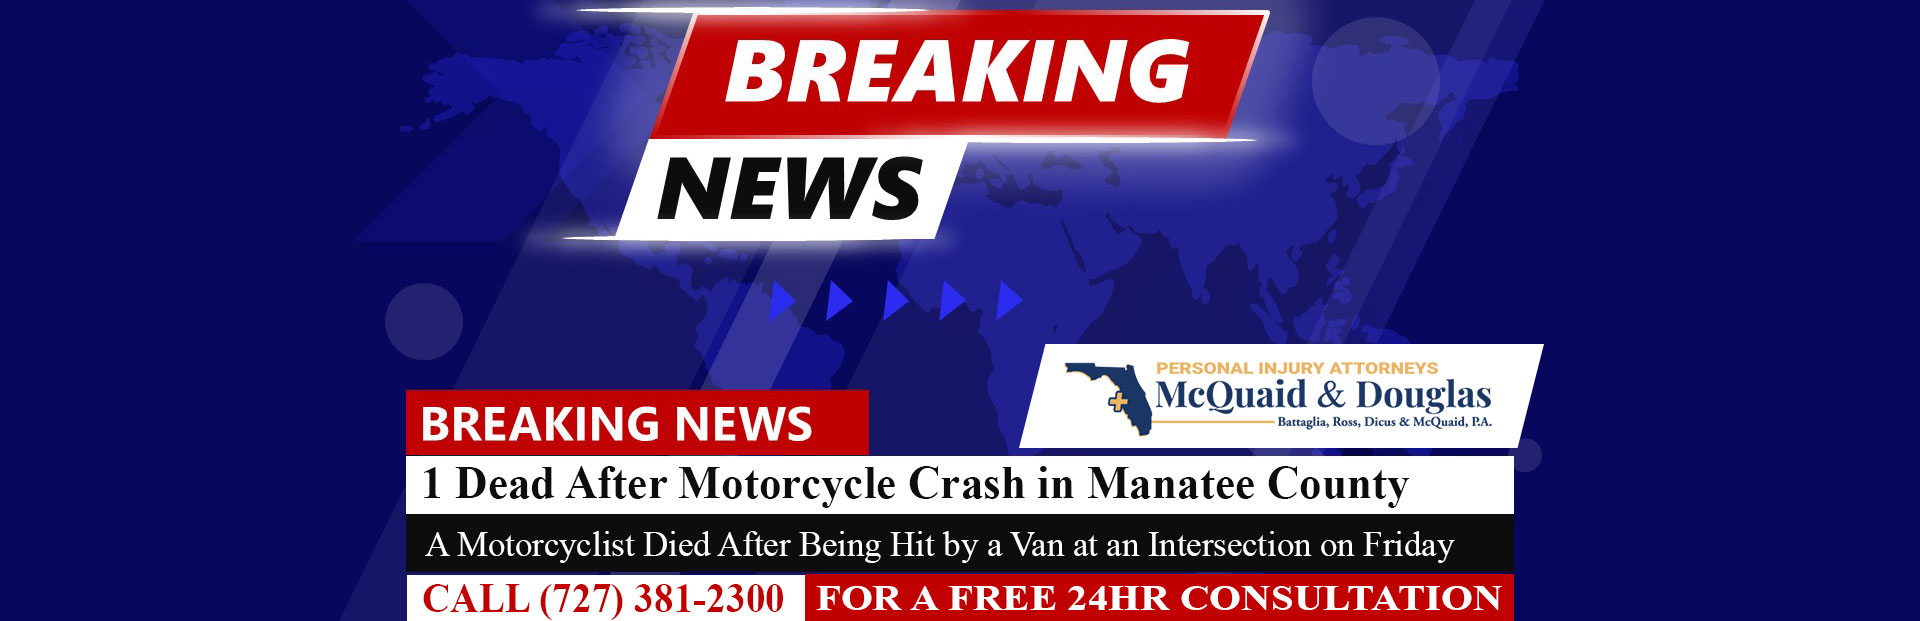 [05-26-24] 1 Dead After Motorcycle Crash in Manatee County